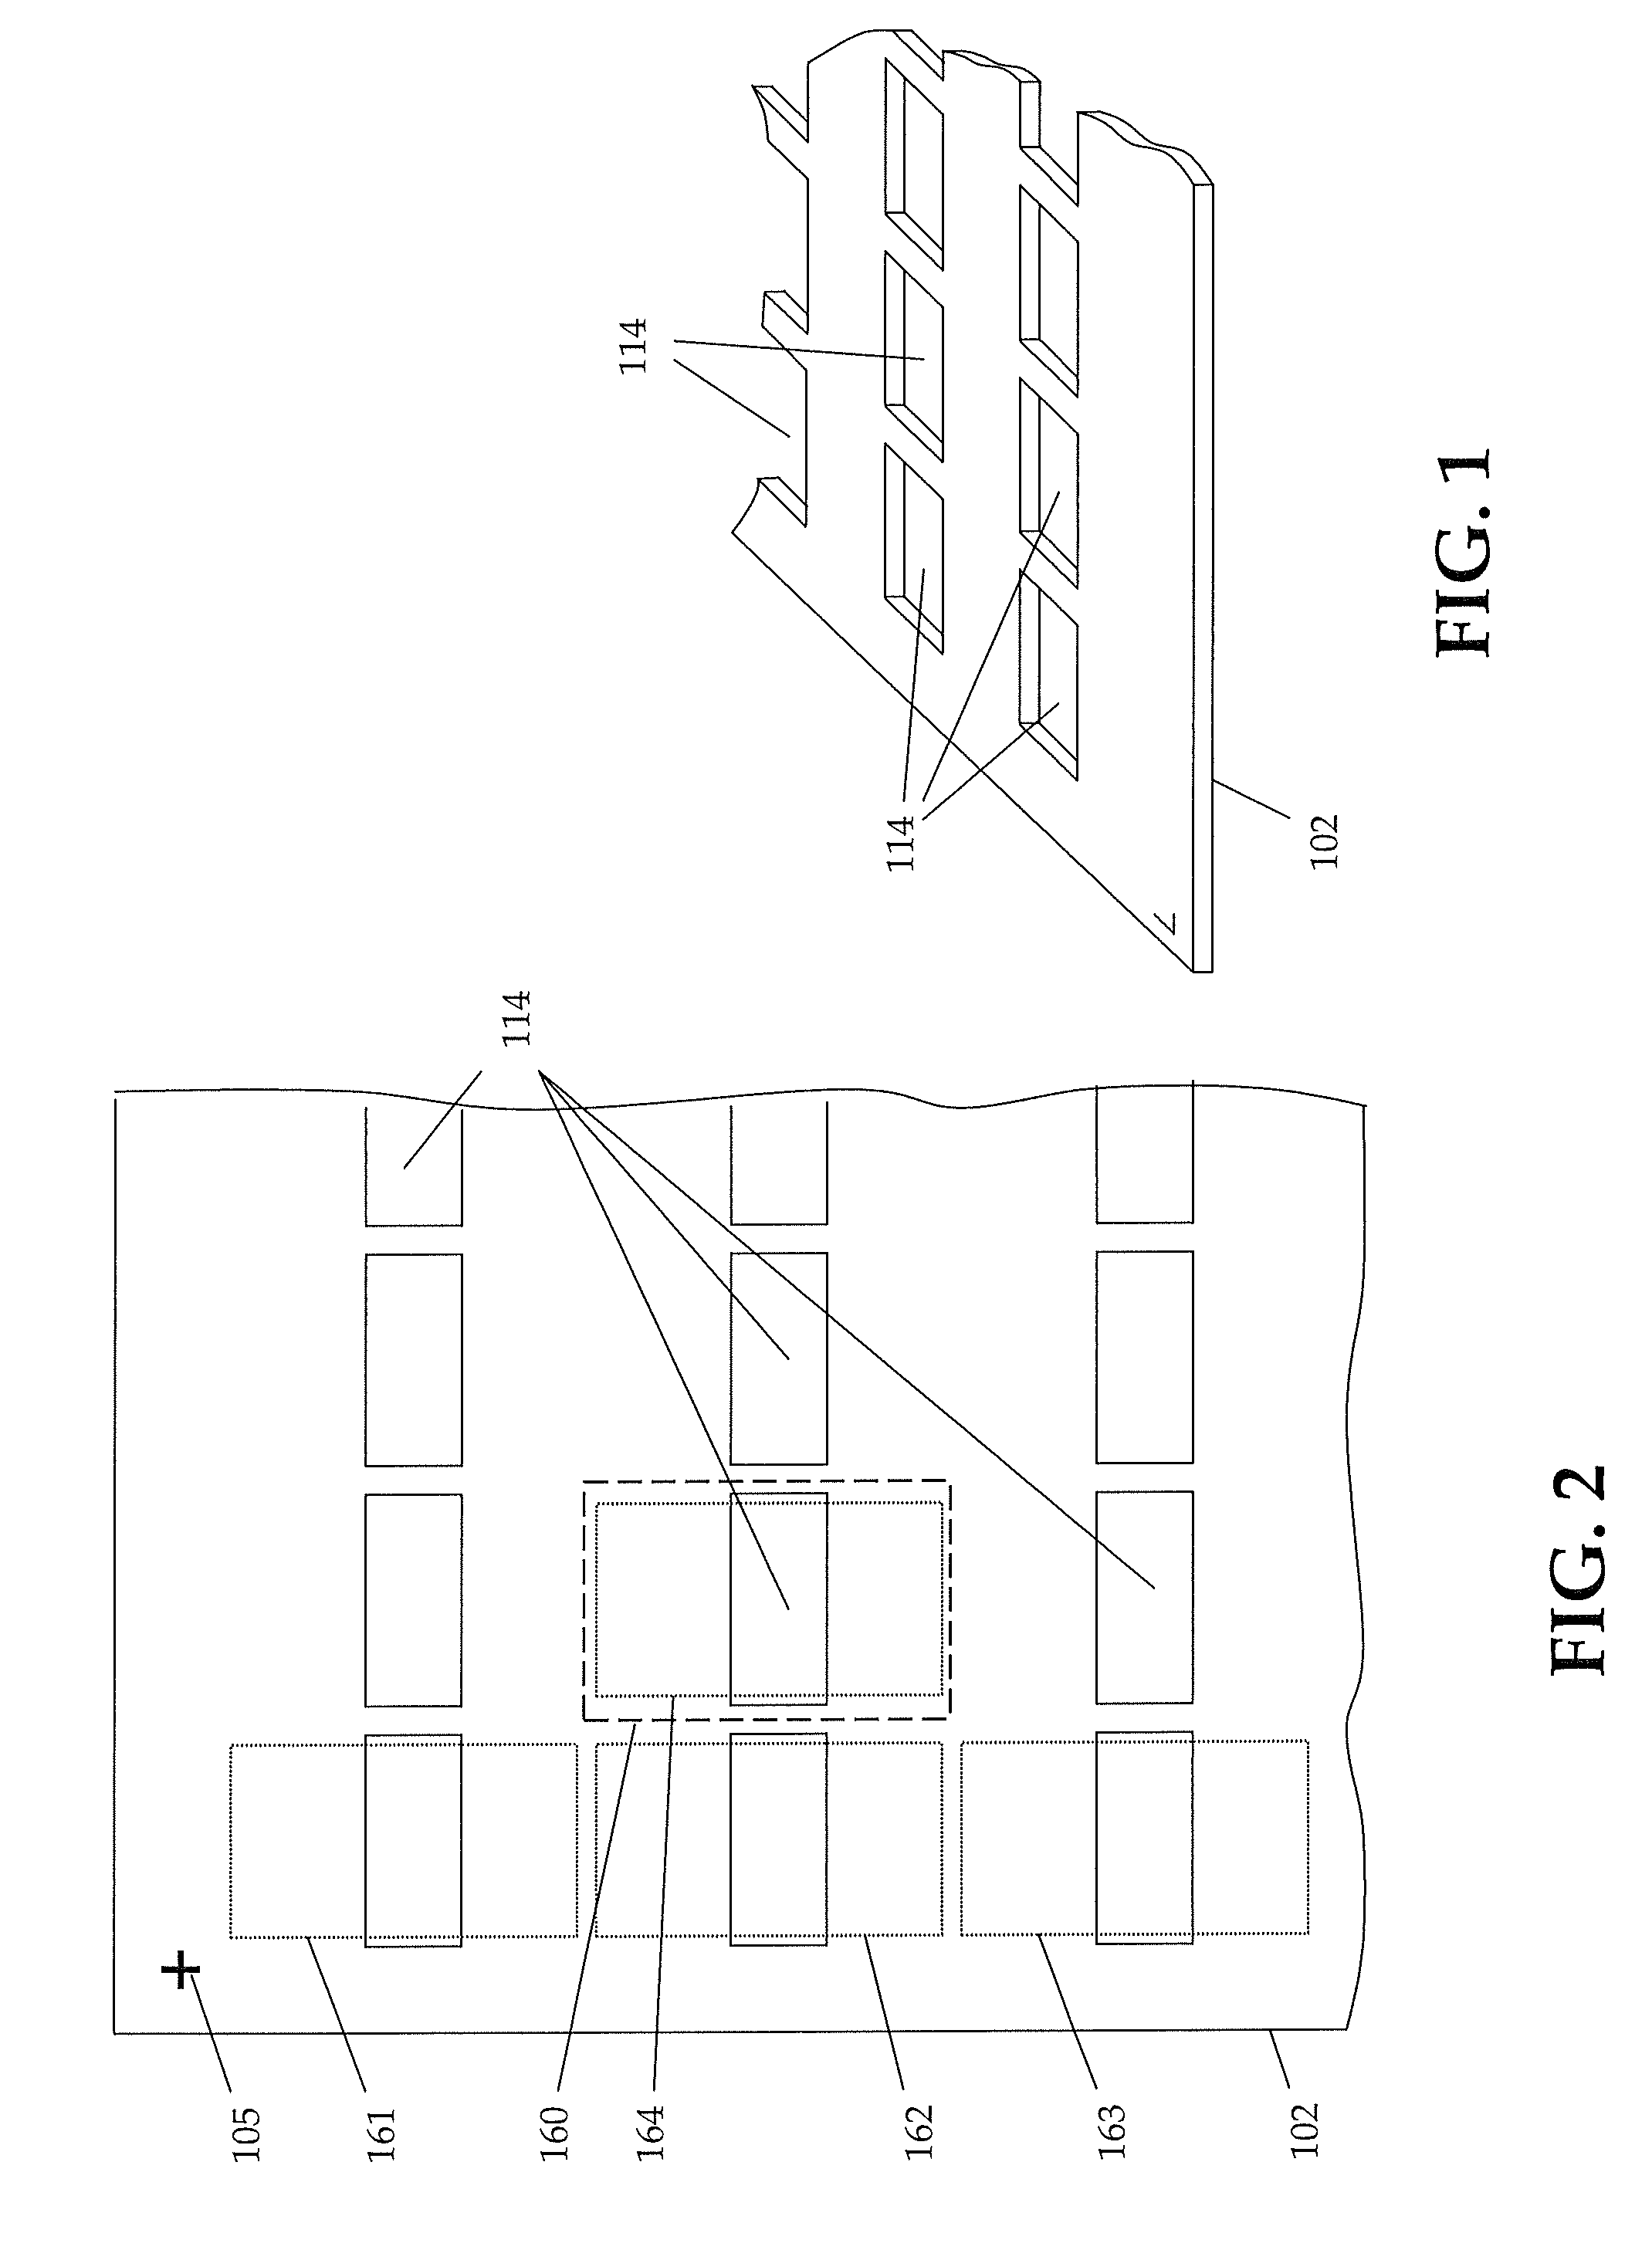 Discrete circuit component having copper block electrodes and method of fabrication